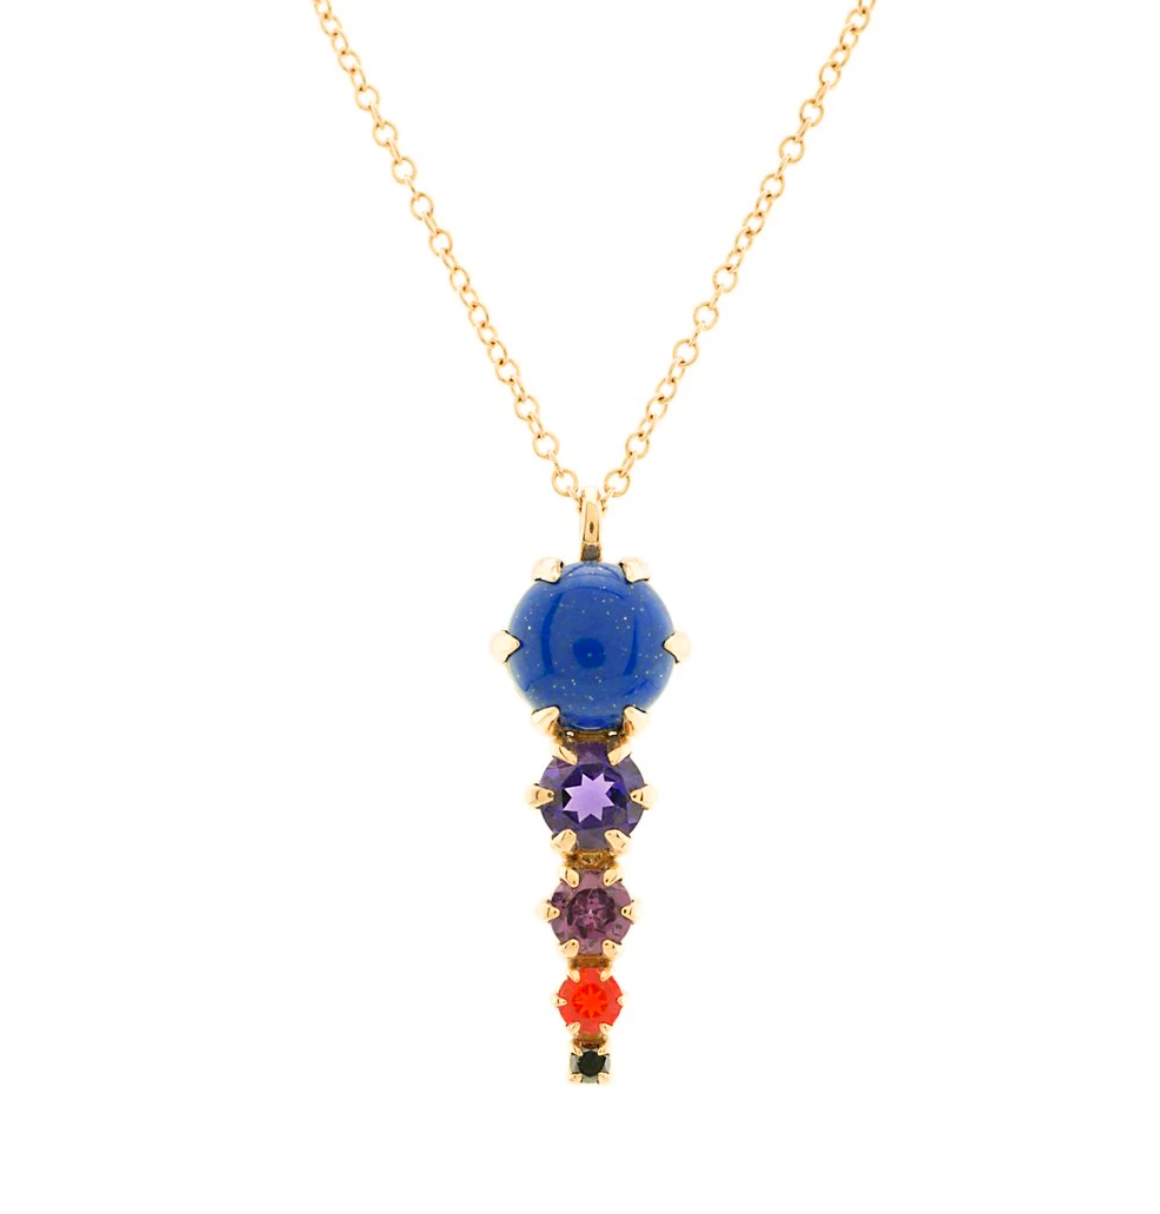 Load image into Gallery viewer, Gem spike pendant necklace, with Lapis, amethyst, garnet, fire opal, and black diamond gemstones, close up on white background.
